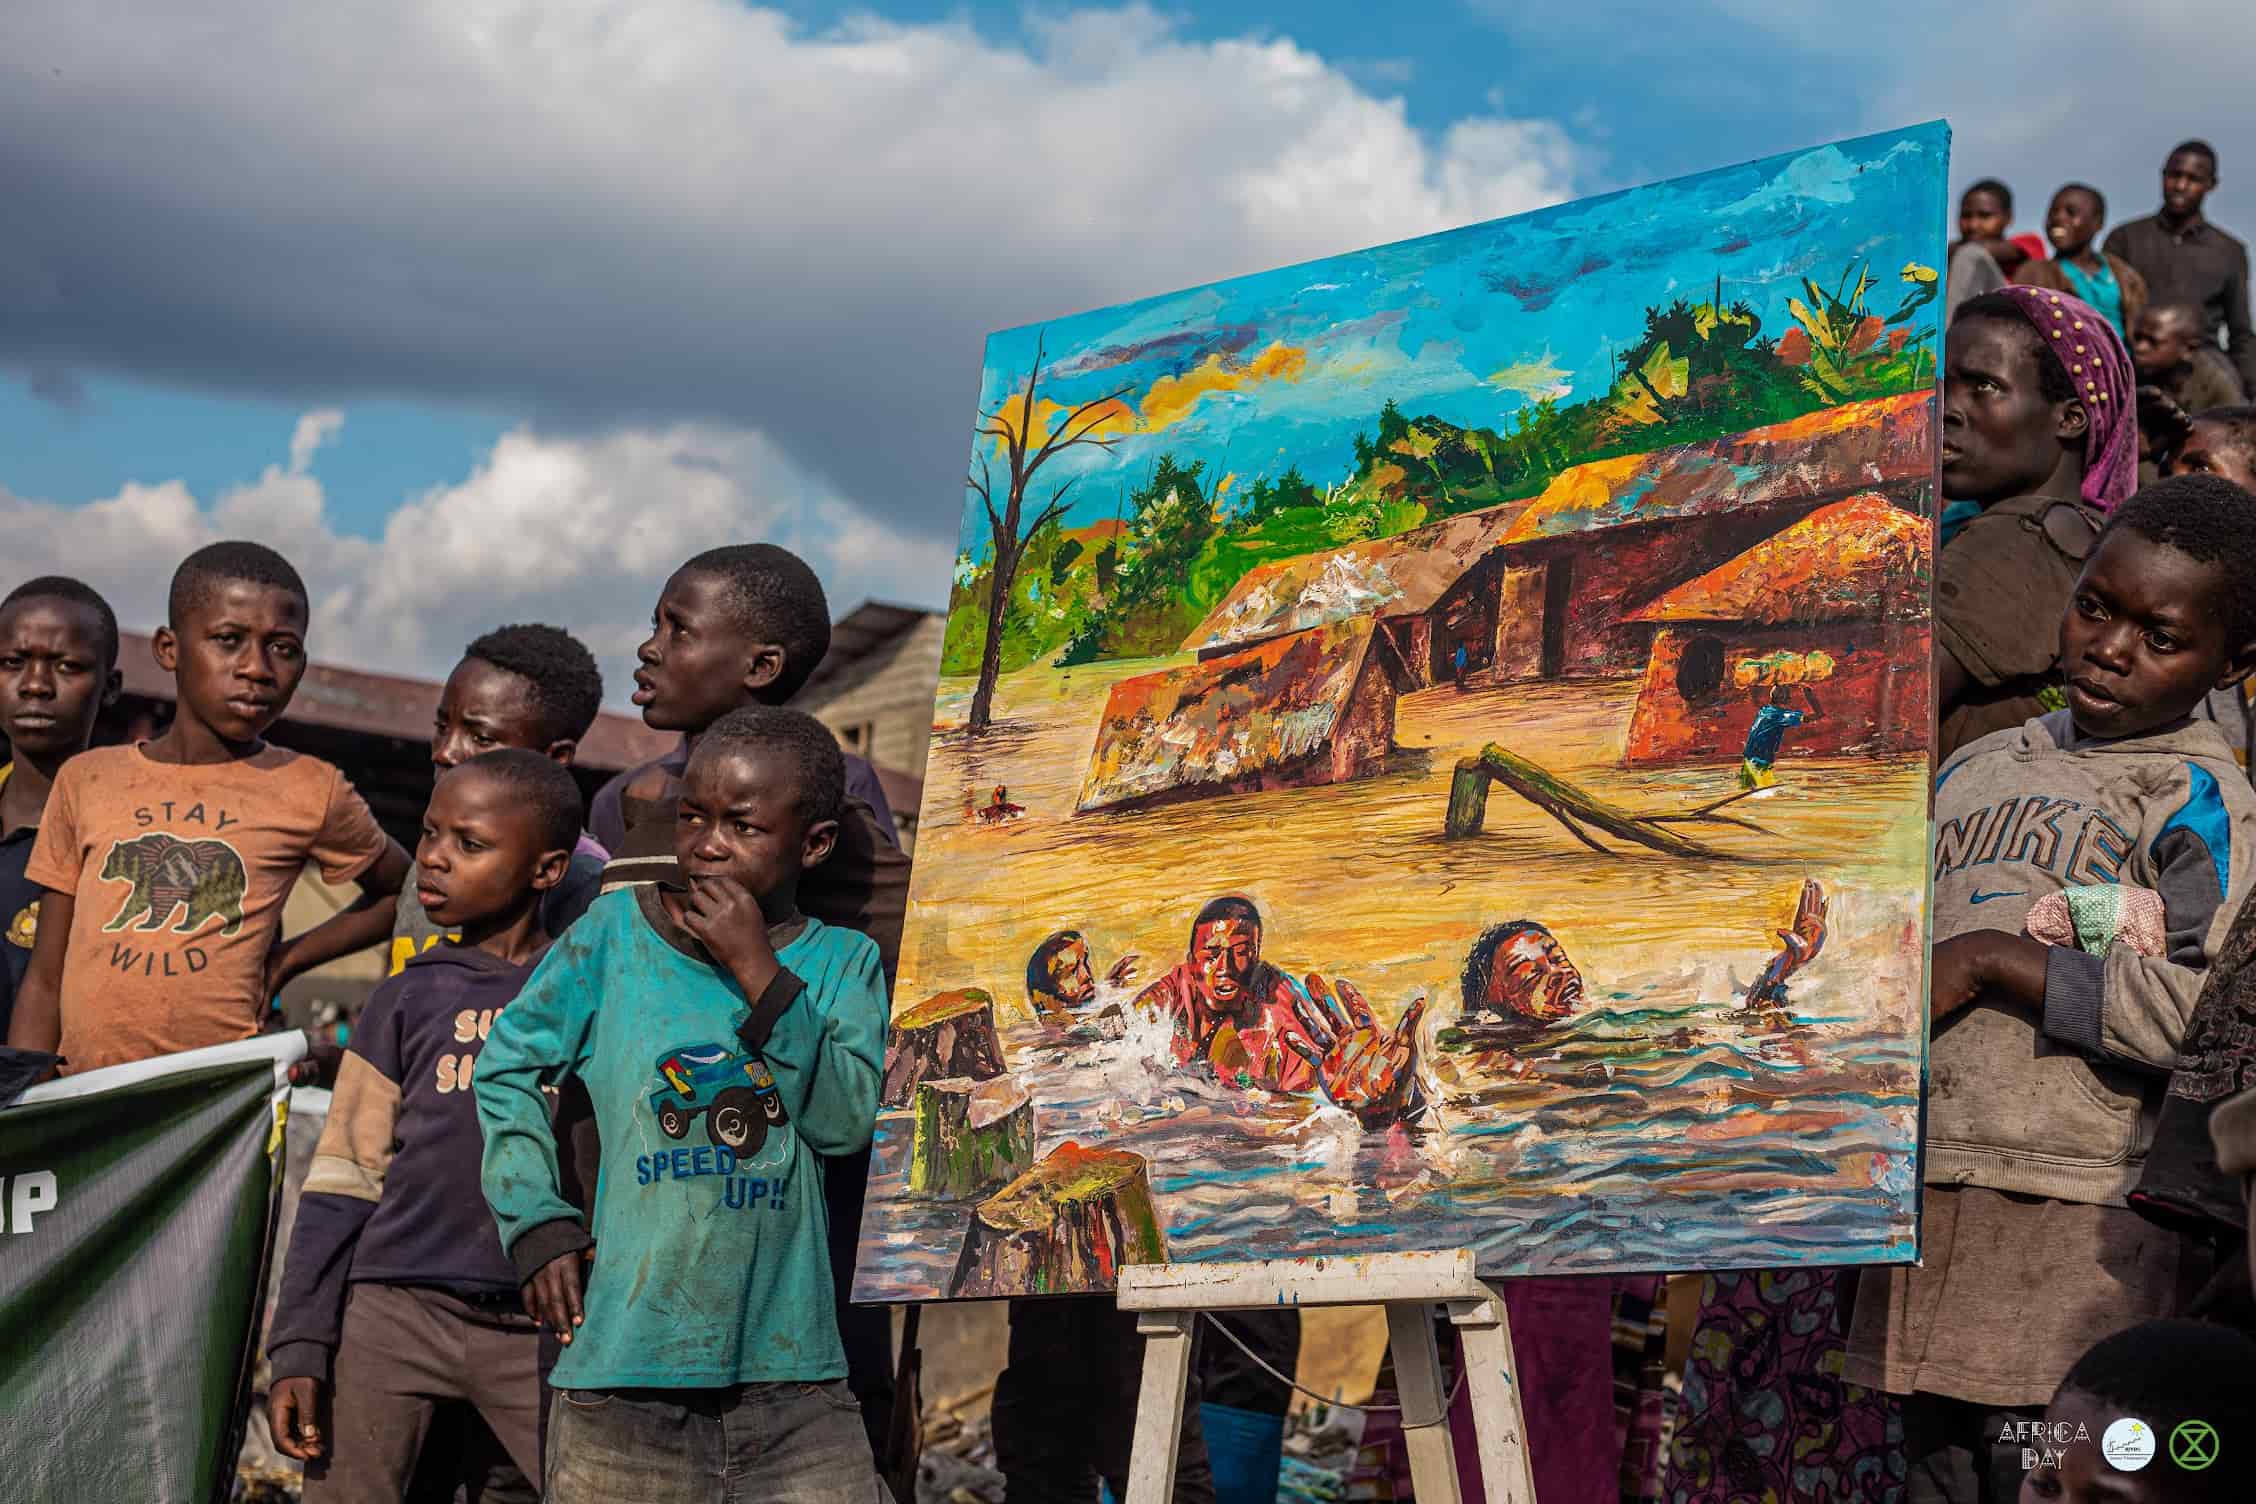 Children stand around a painting showing an apocalyptic scene of a village on fire and people drowning